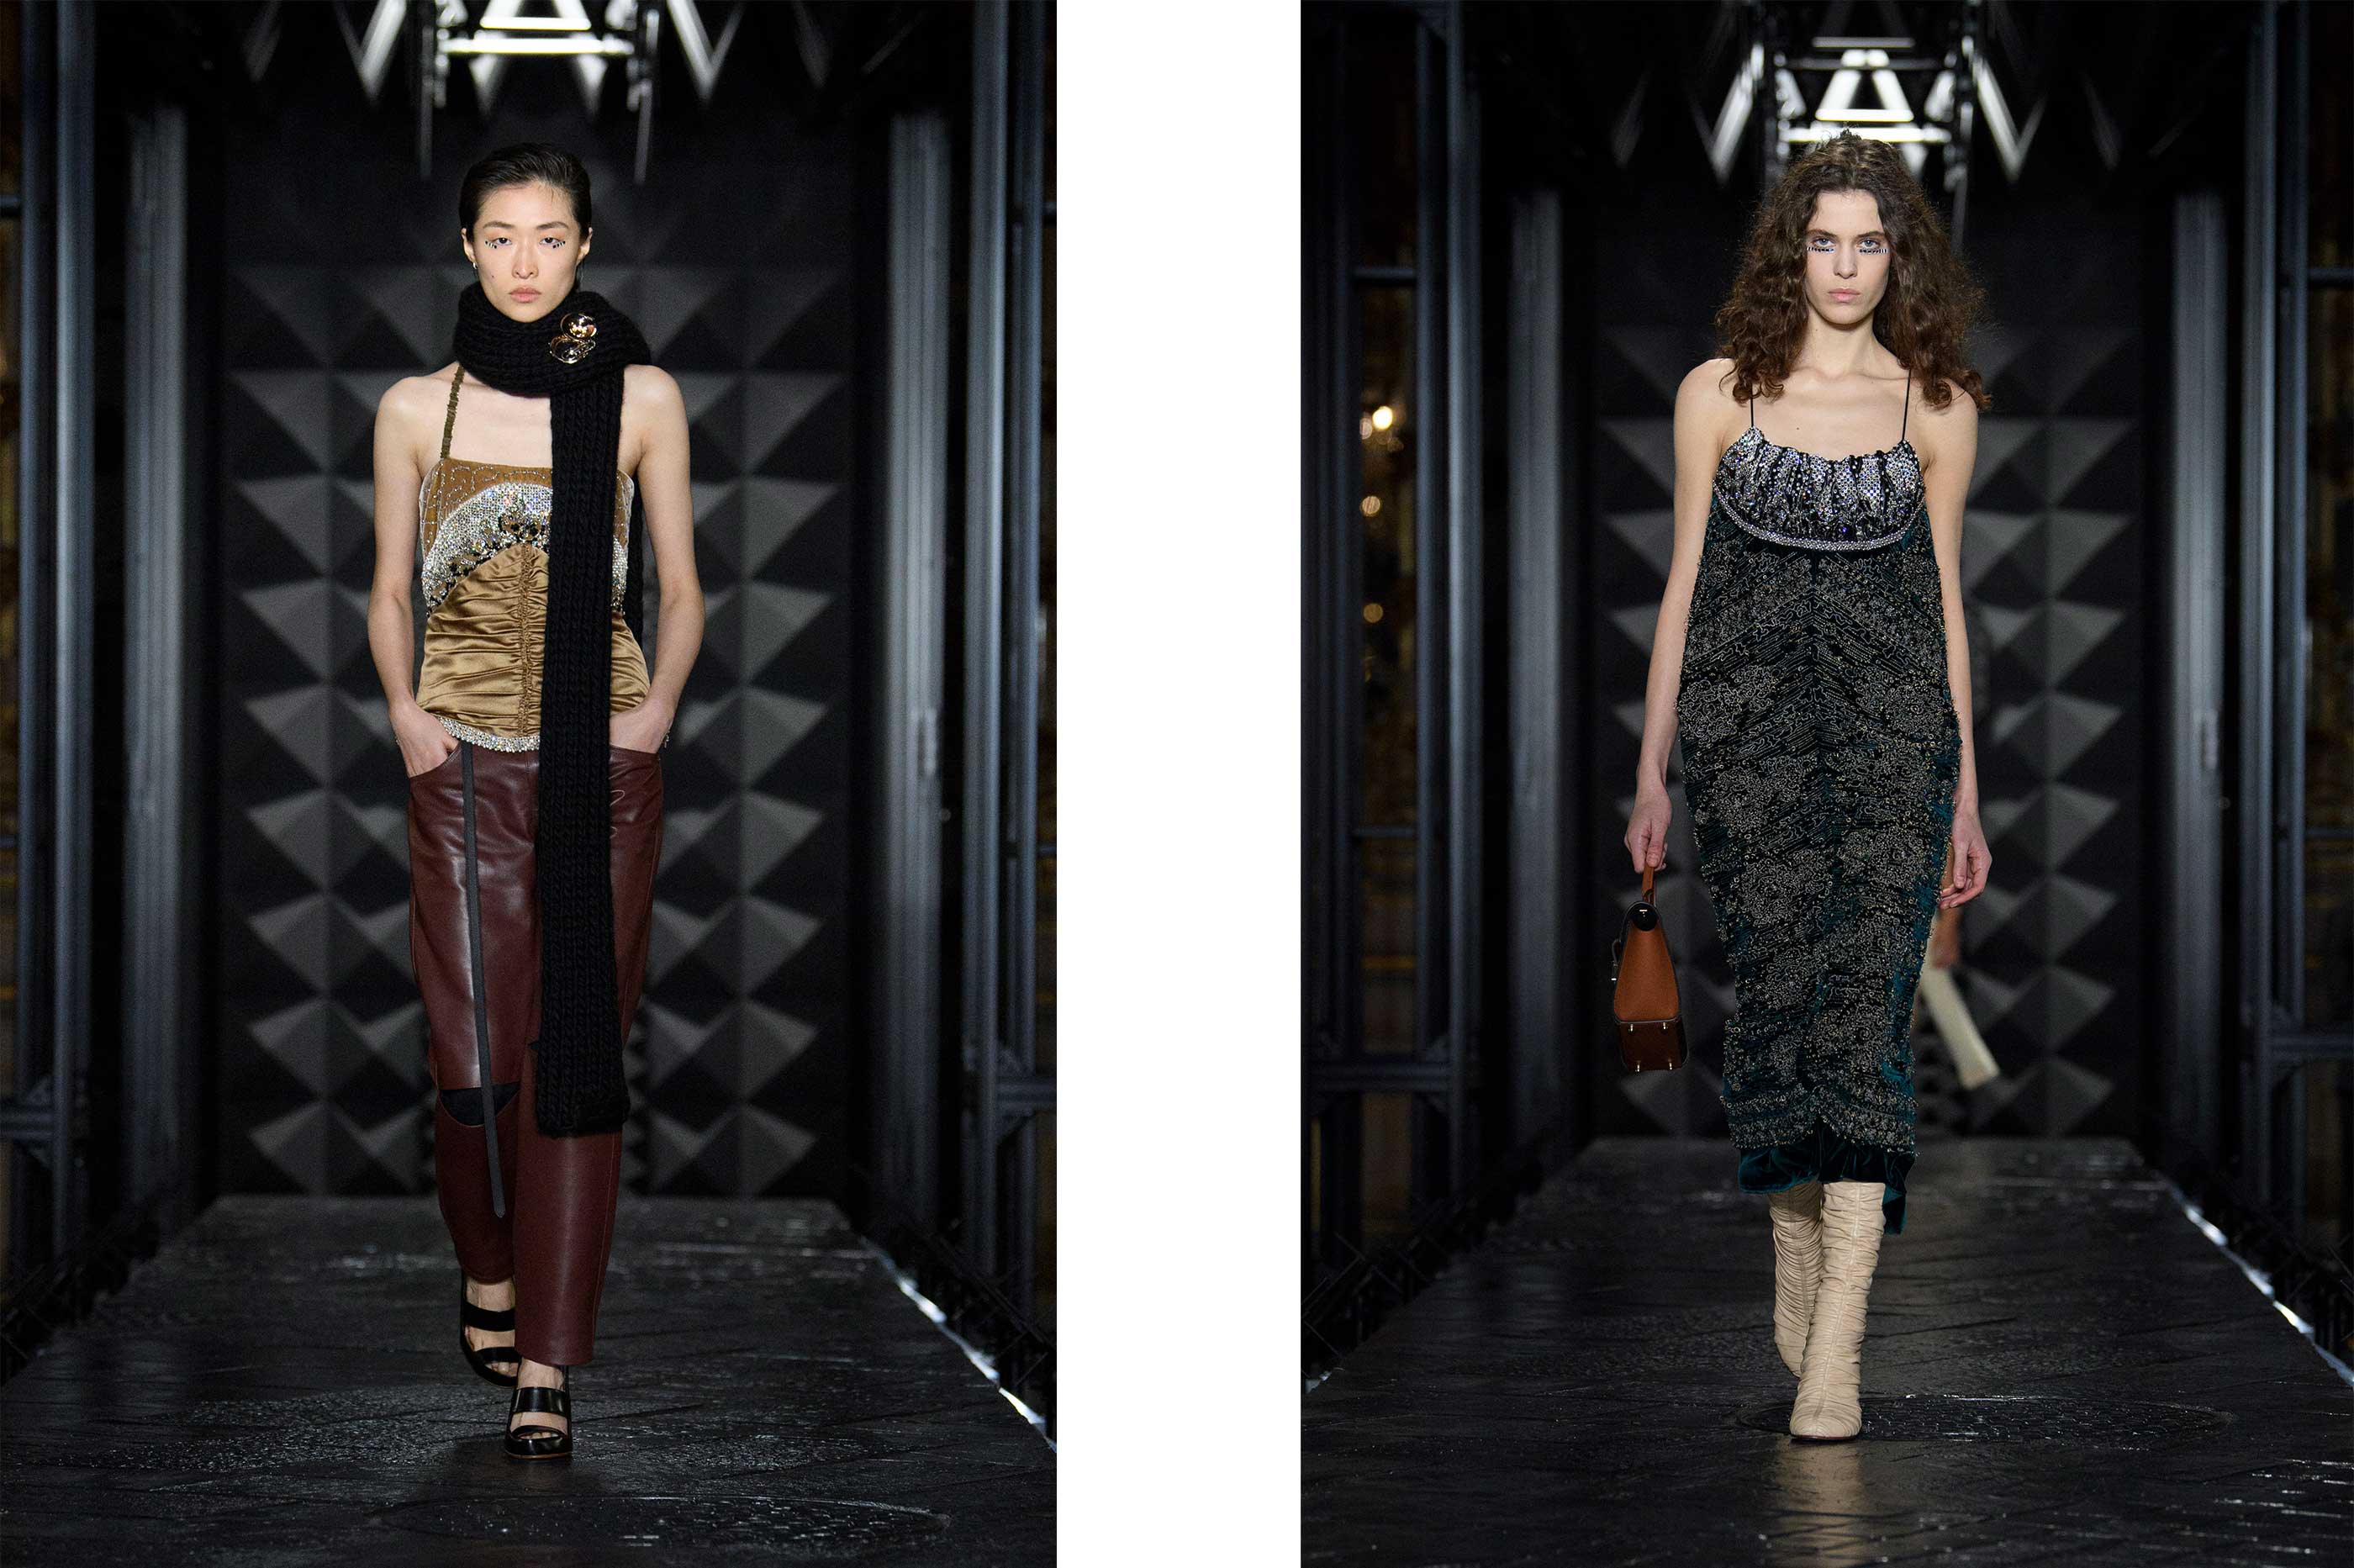 Drooling over the fall / winter styling of this Louis Vuitton